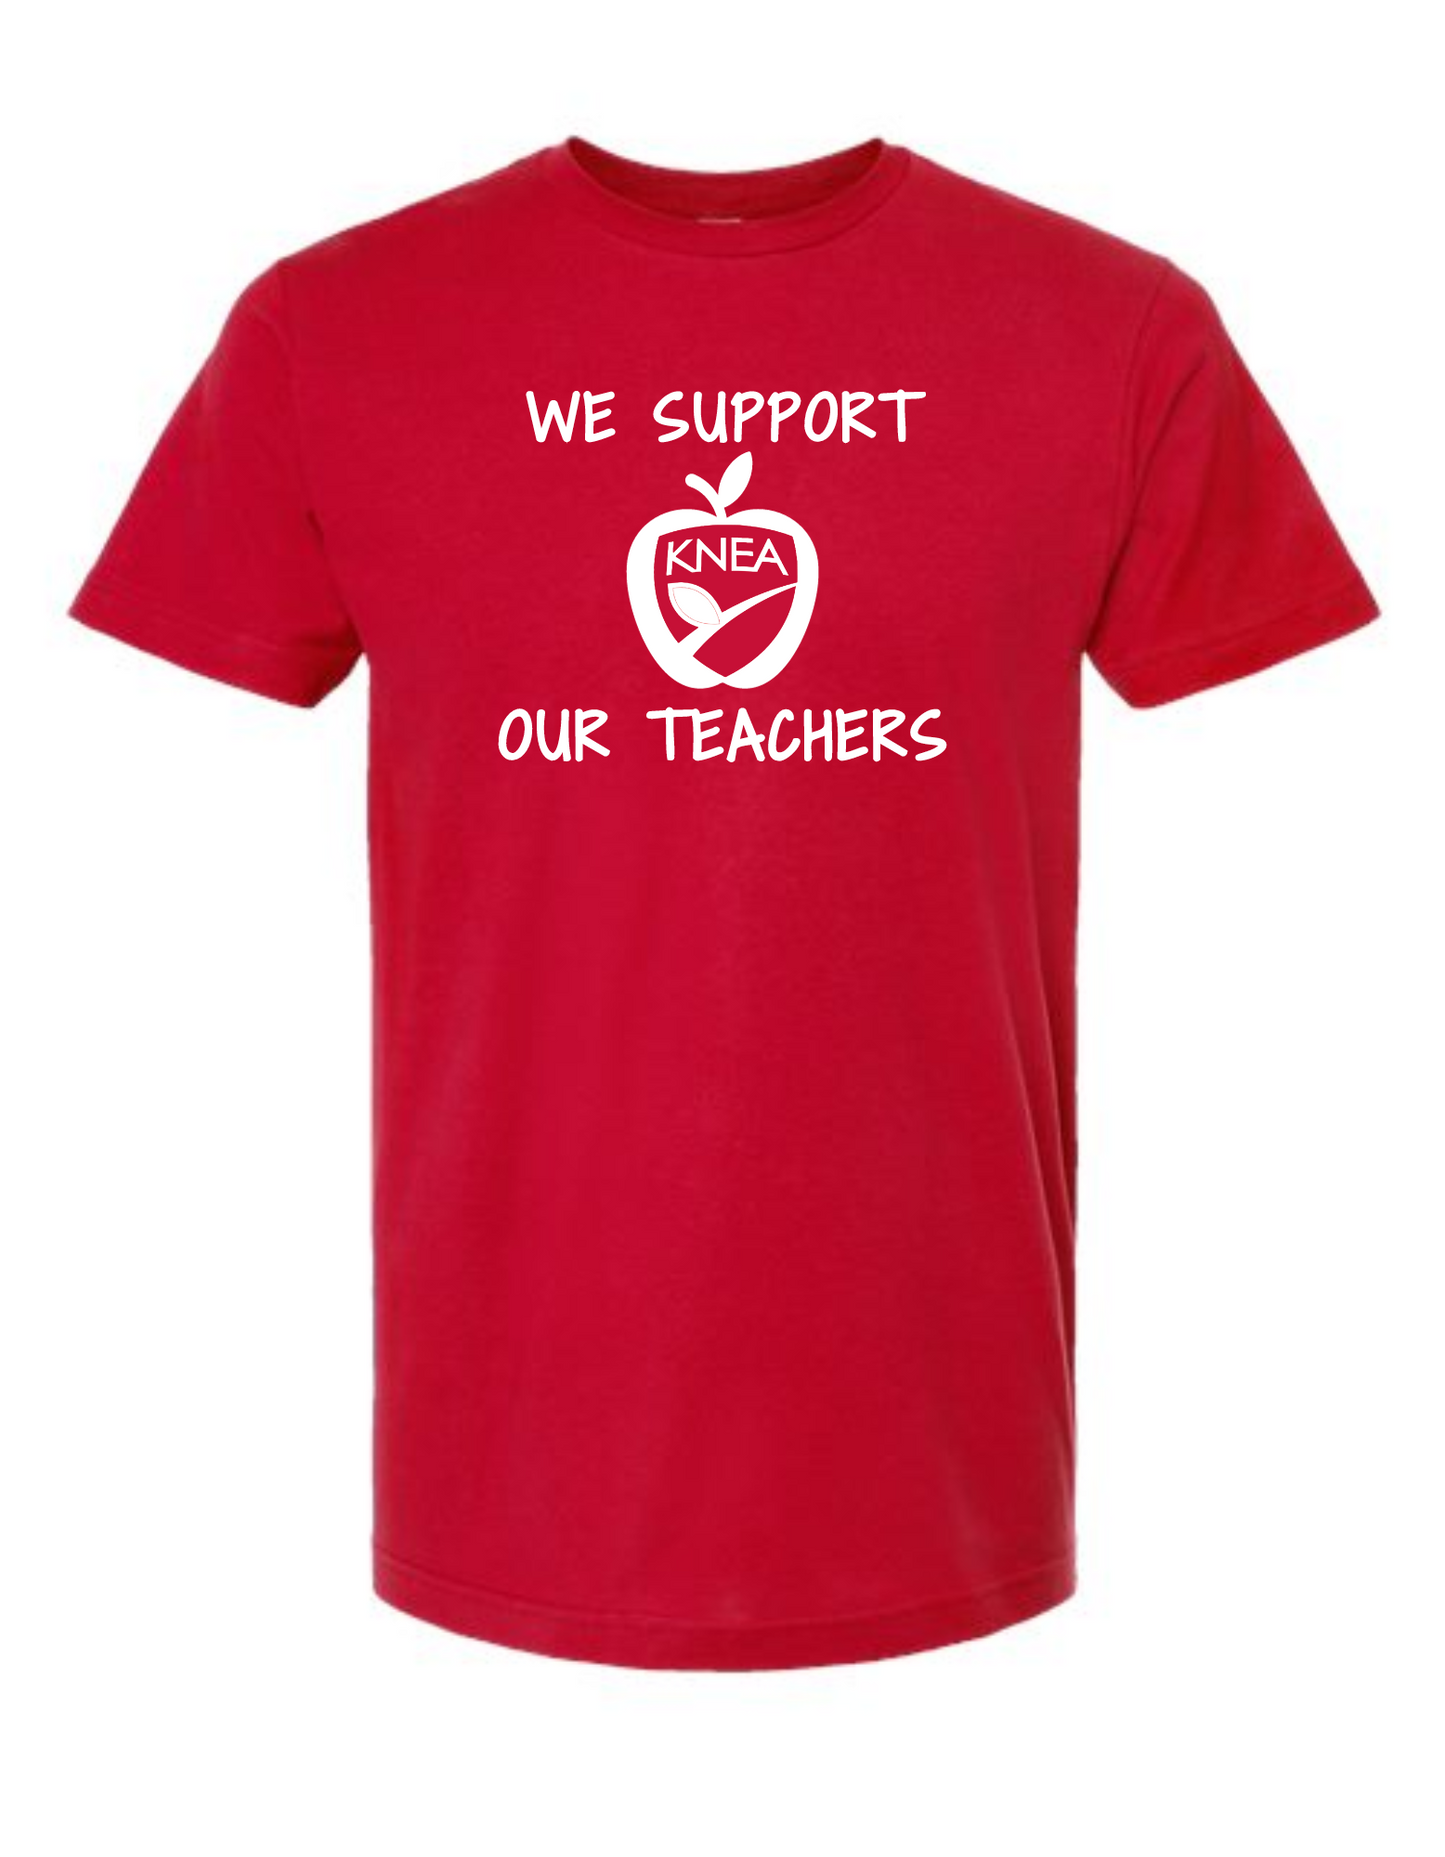 We Support Our Teachers, tee